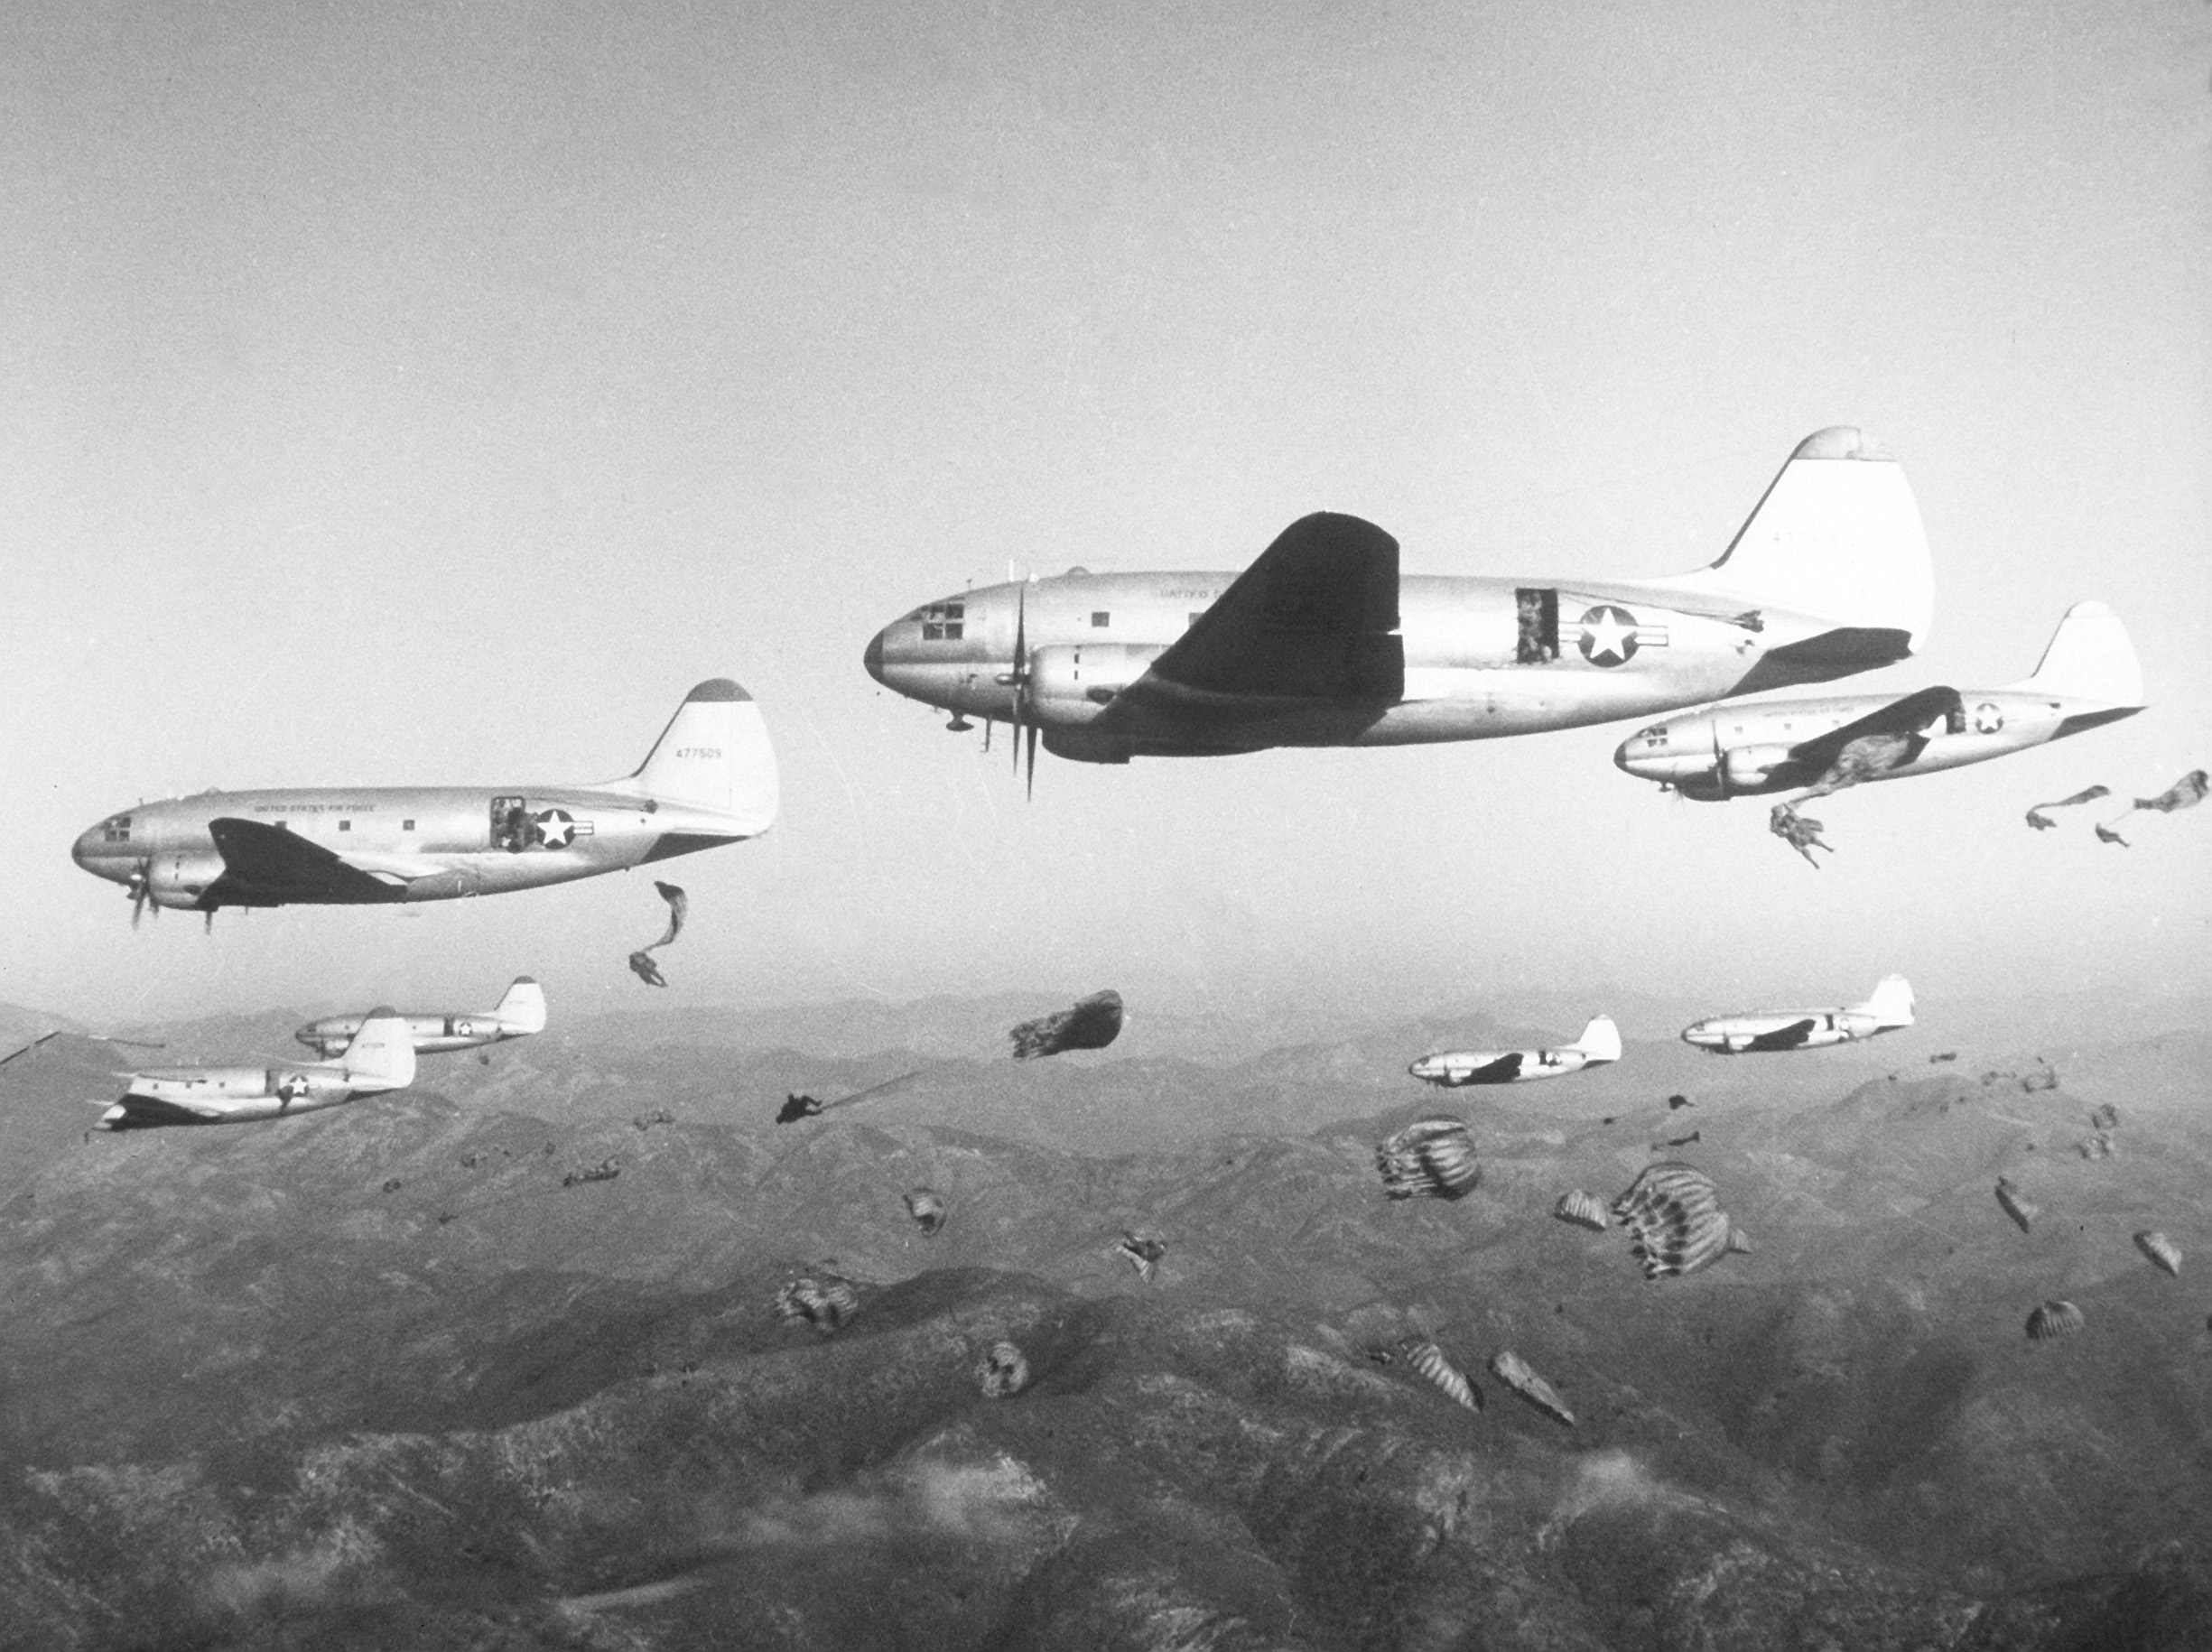 US 187th Regimental Combat Team troops being paradropped from C-46 transport aircraft during a training operation over Korea, date unknown